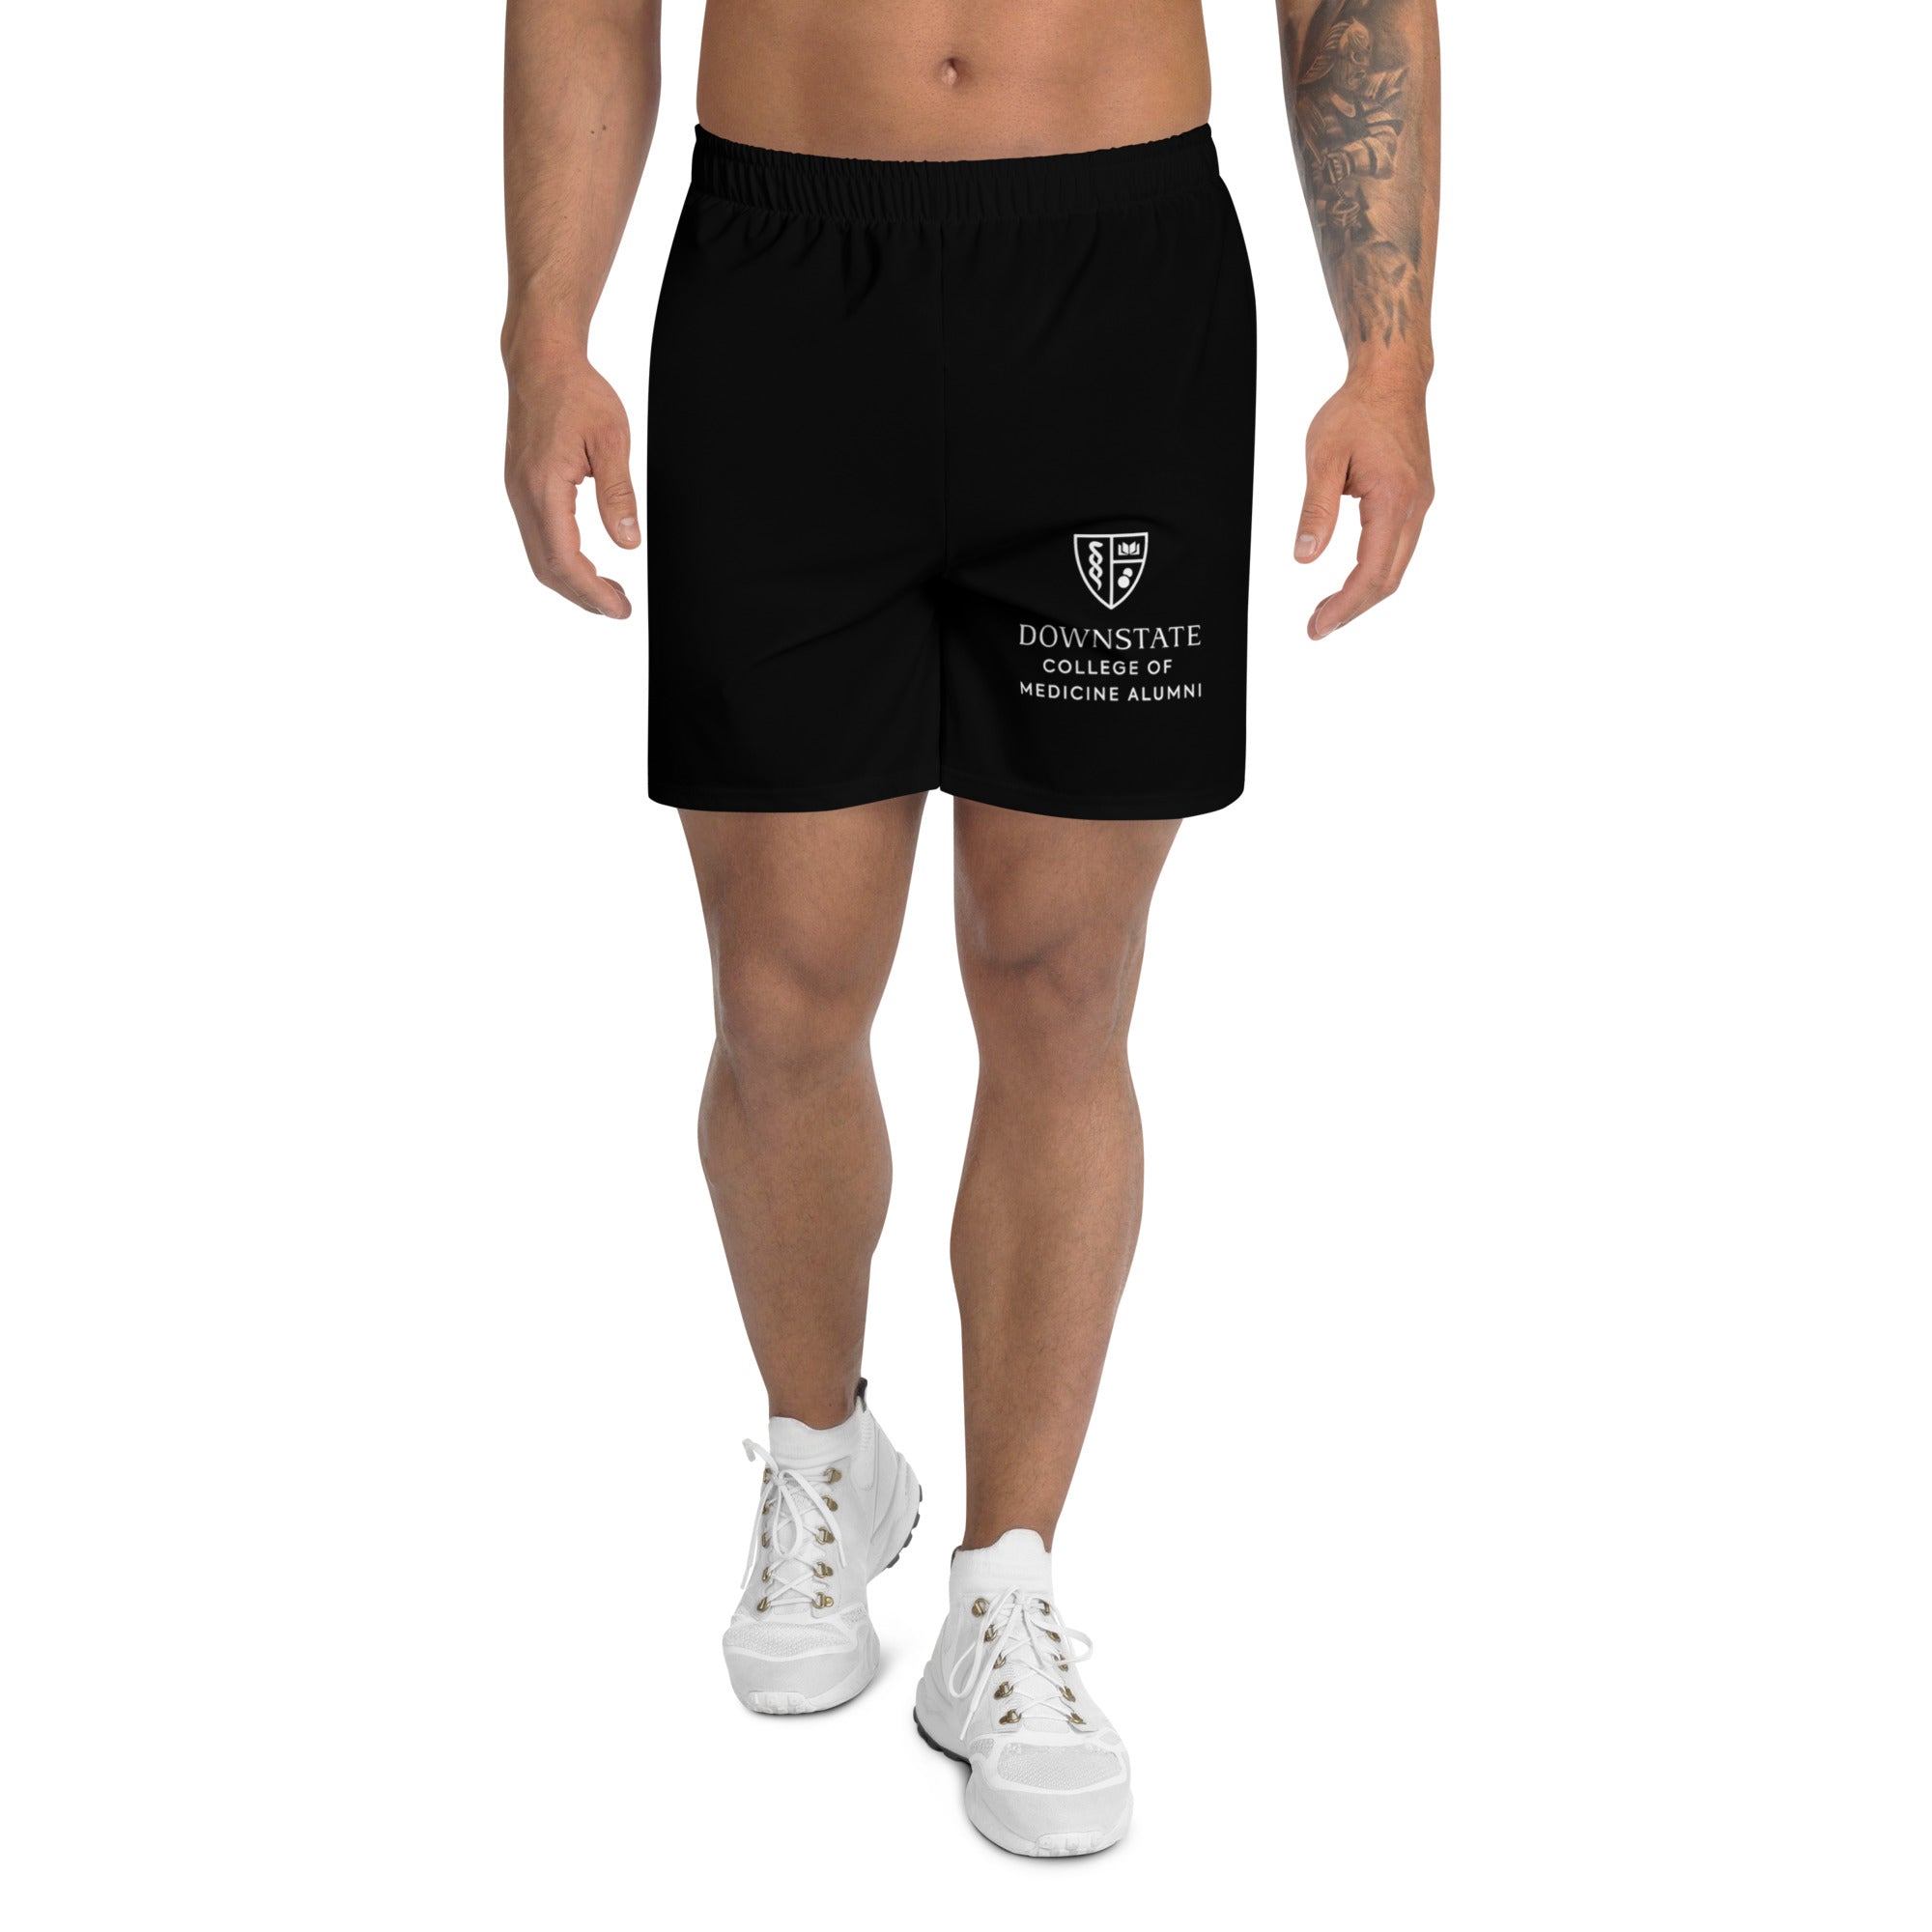 AACMSD Men's Recycled Athletic Shorts